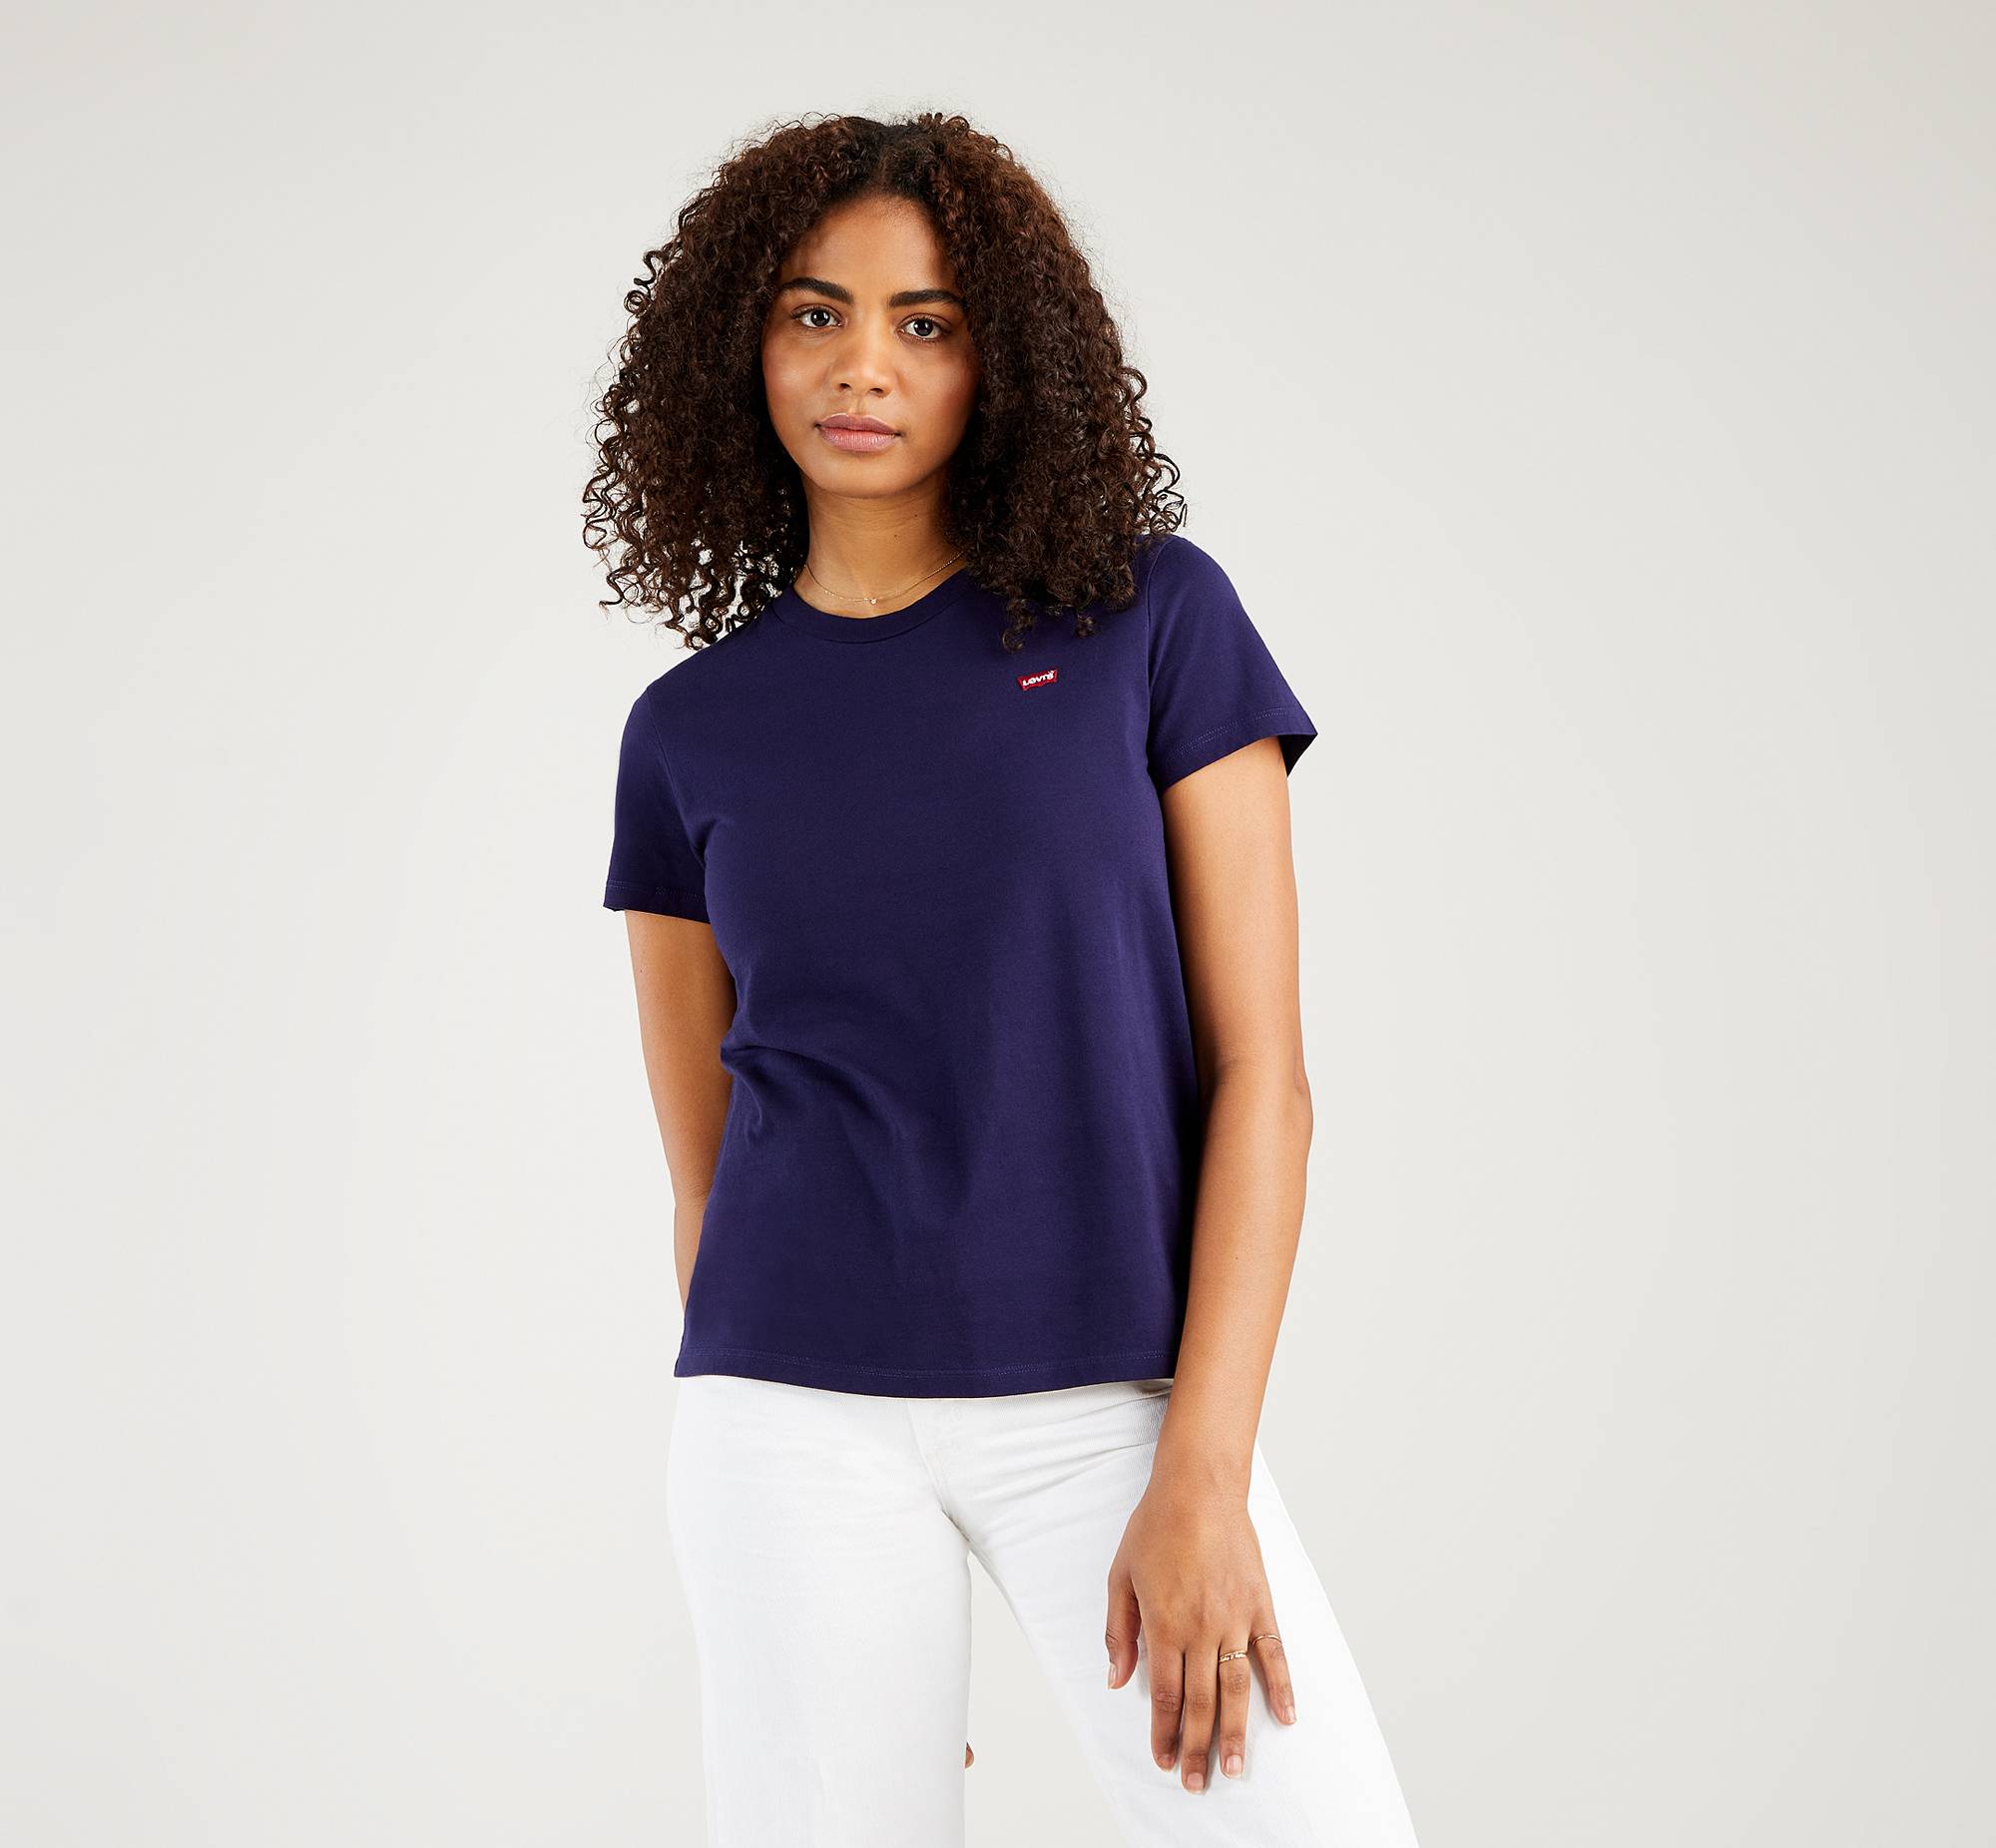 The Perfect Tee 1